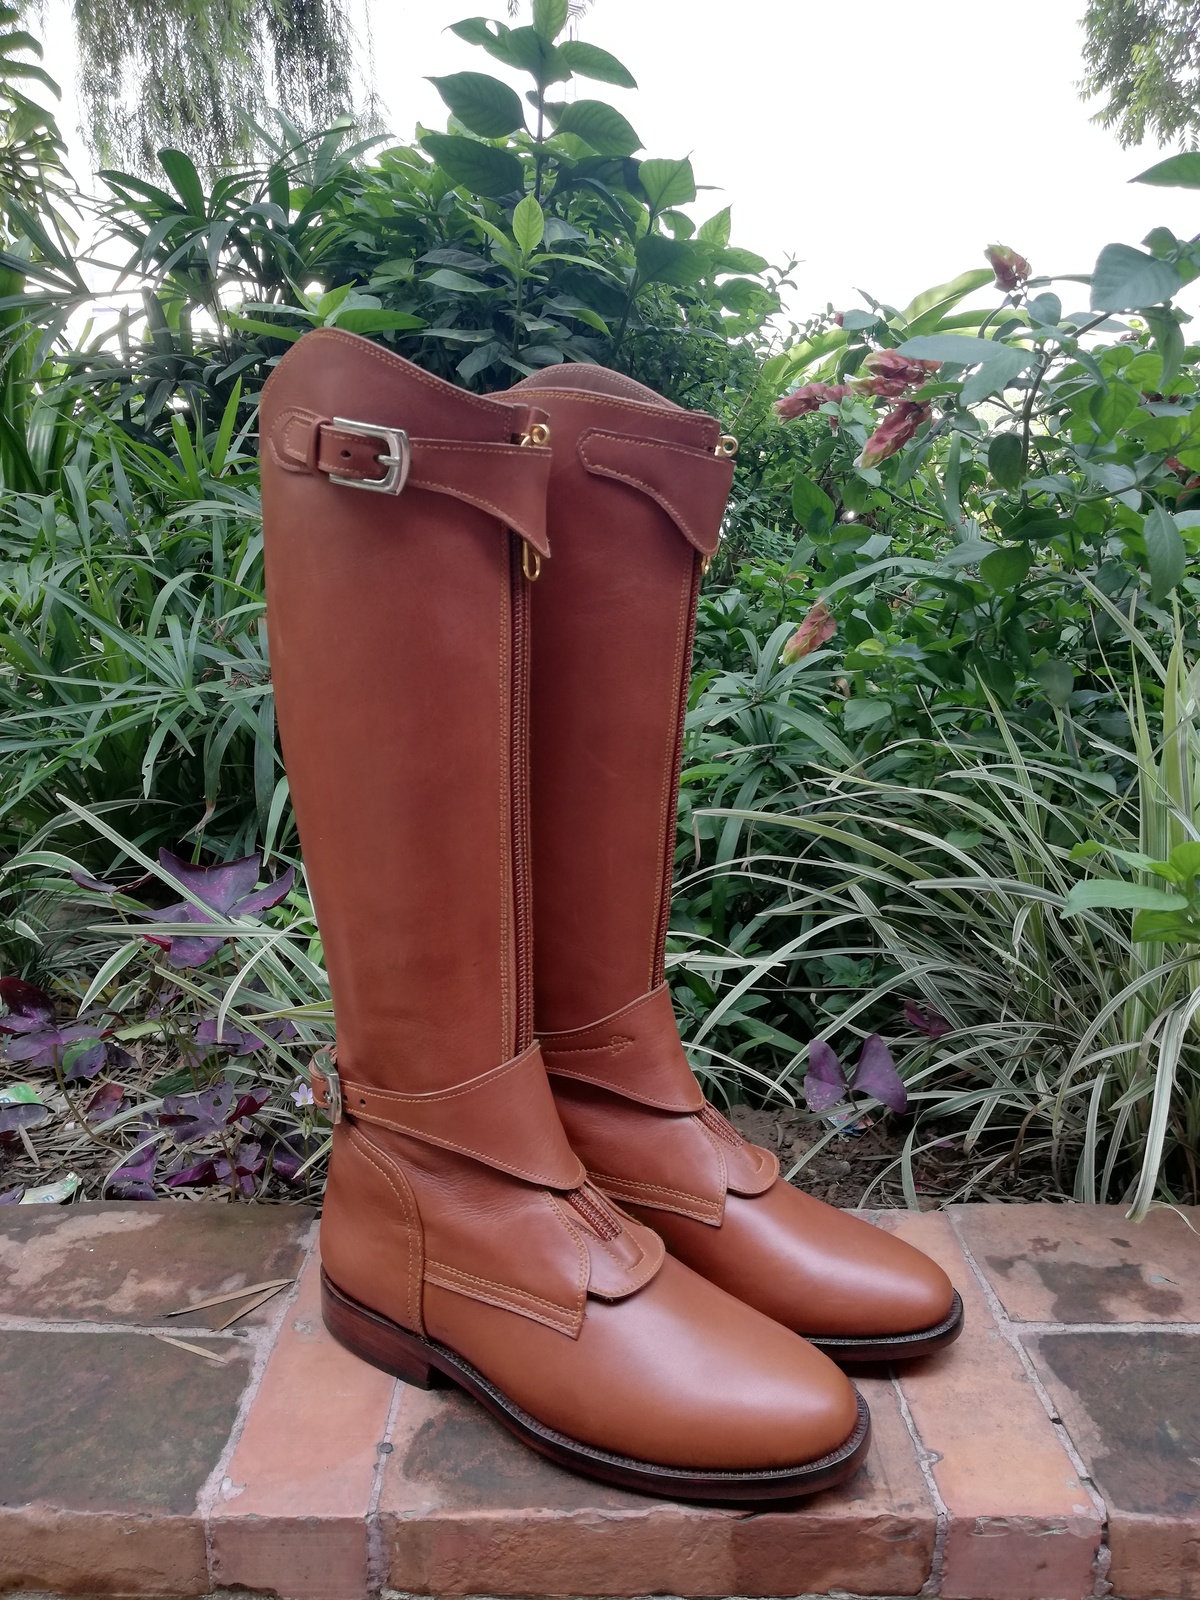 Tan Handmade Tall Leather Riding Boots Men Boots for Horse Riding Polo ...